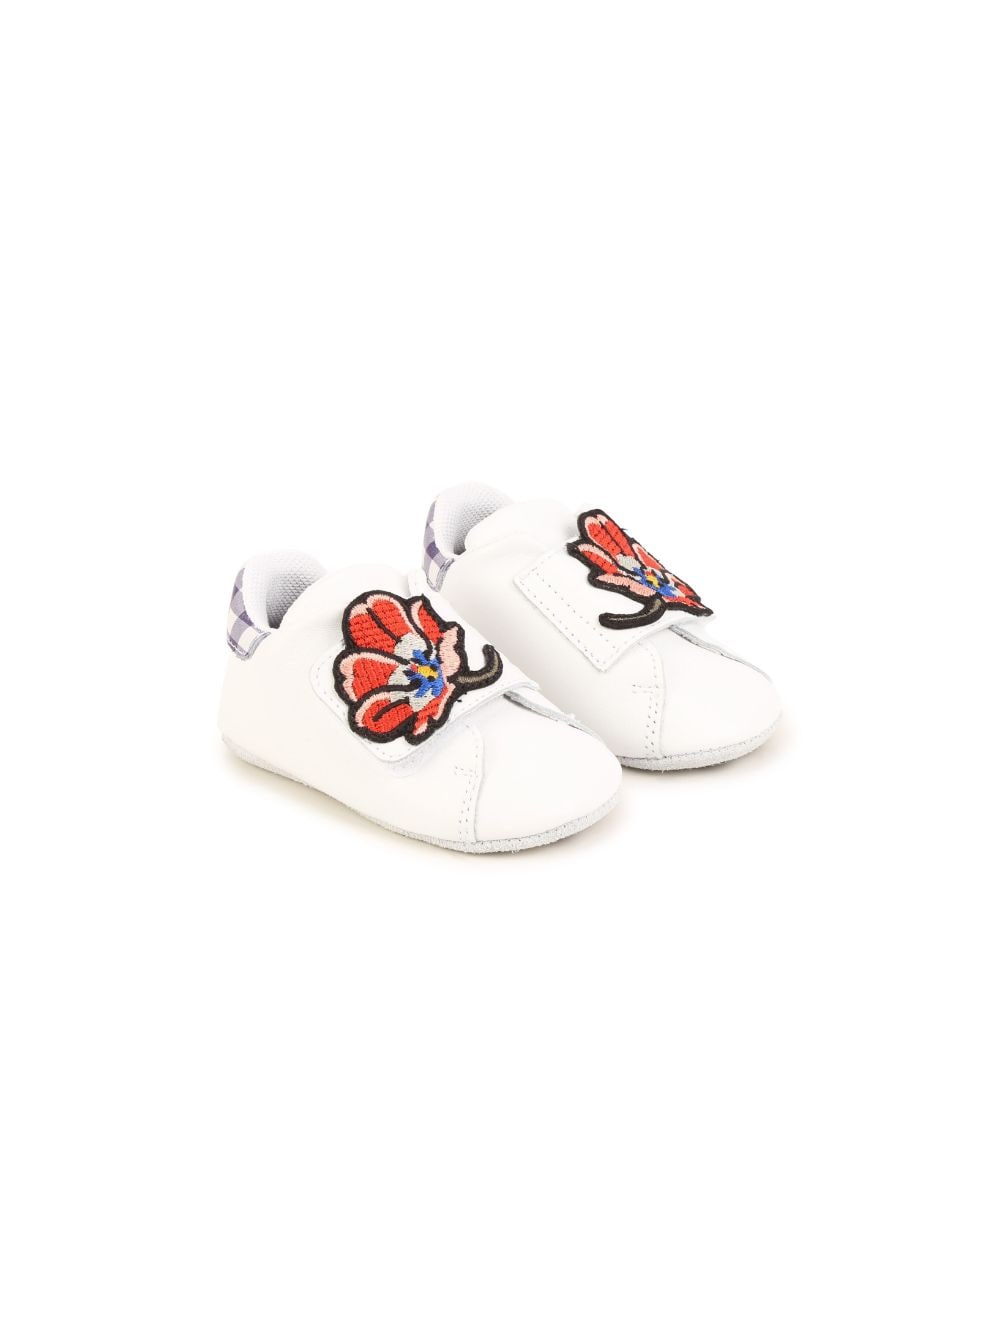 Kenzo Kids floral-patch touch-strap slippers - White von Kenzo Kids